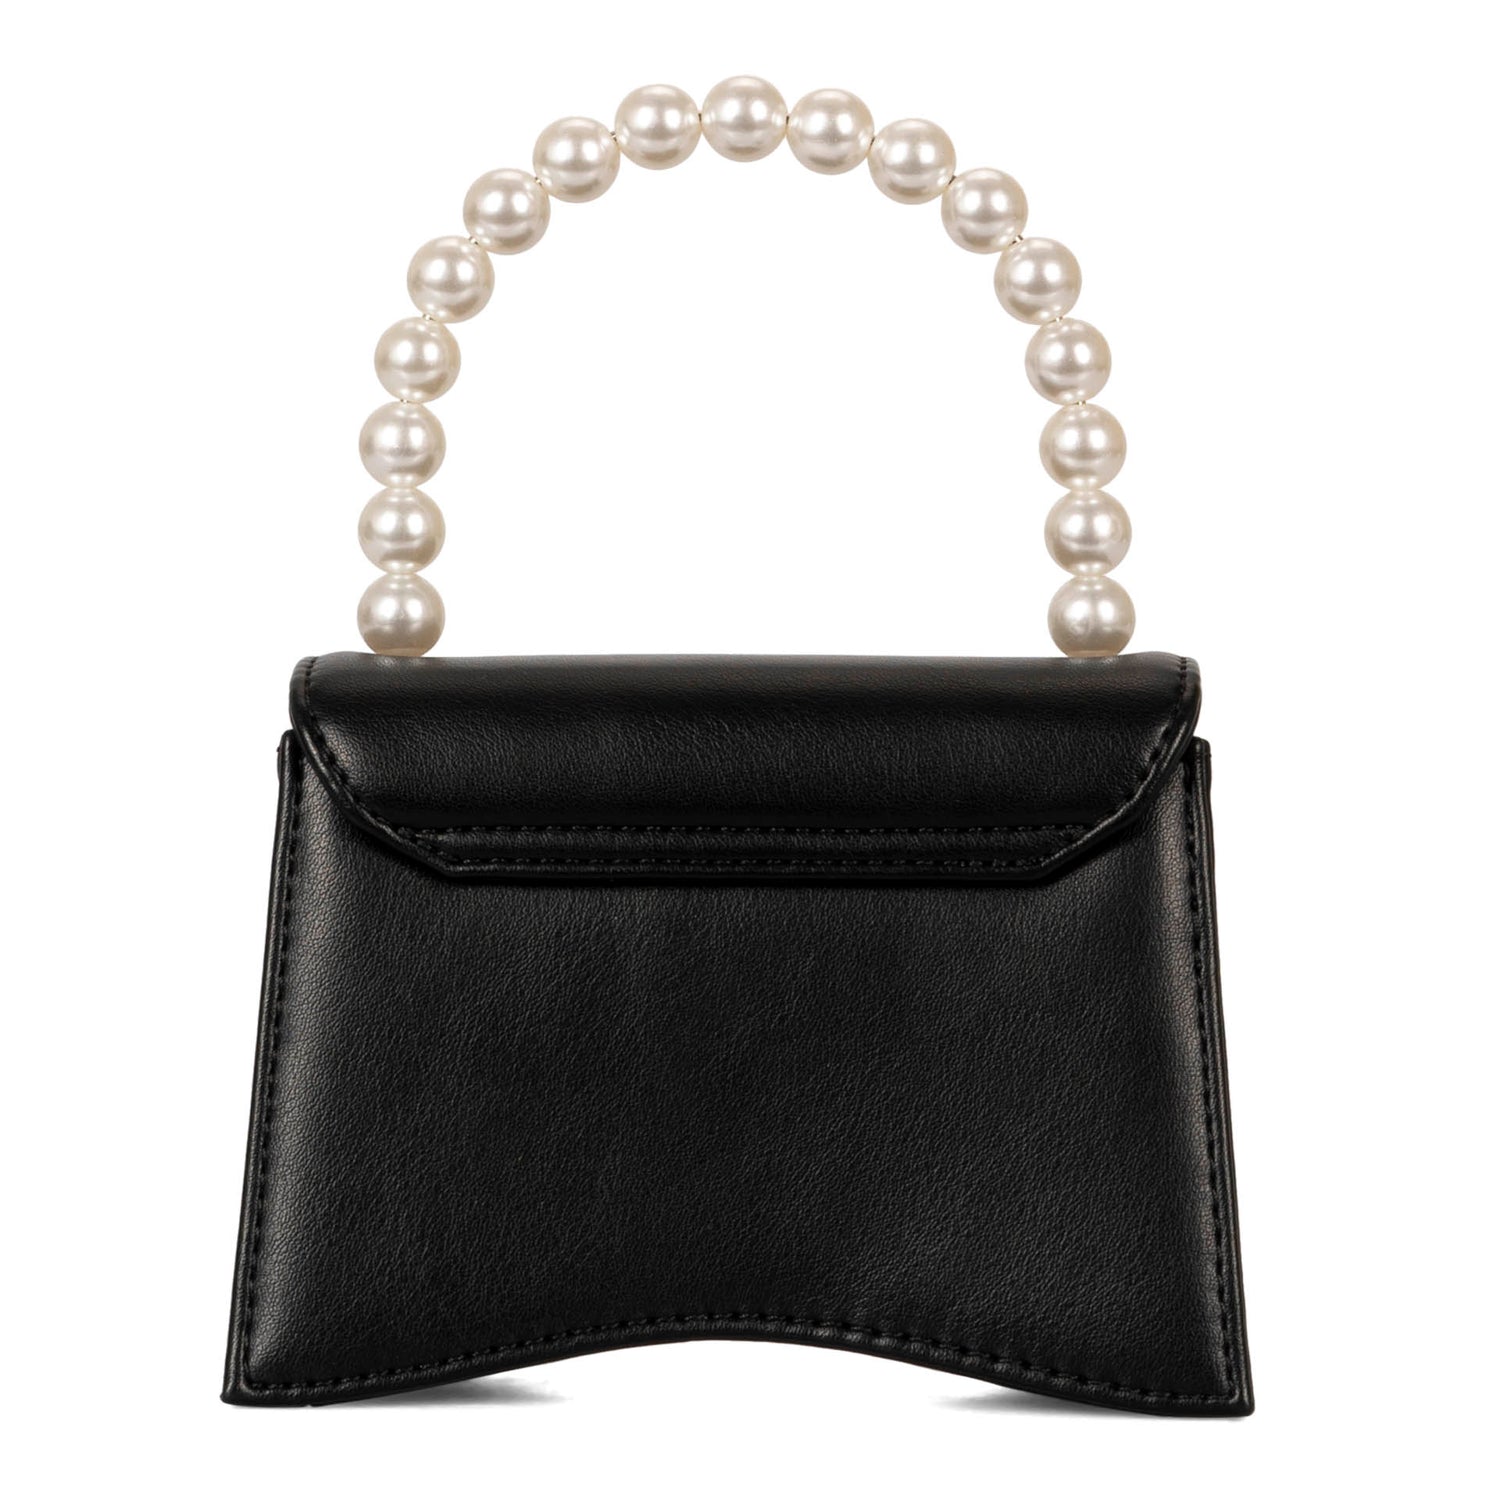 Back side view of a black vegan mini crossbody bag called Evening designed by Riona showcasing its pearl-like handle and smooth PU texture.